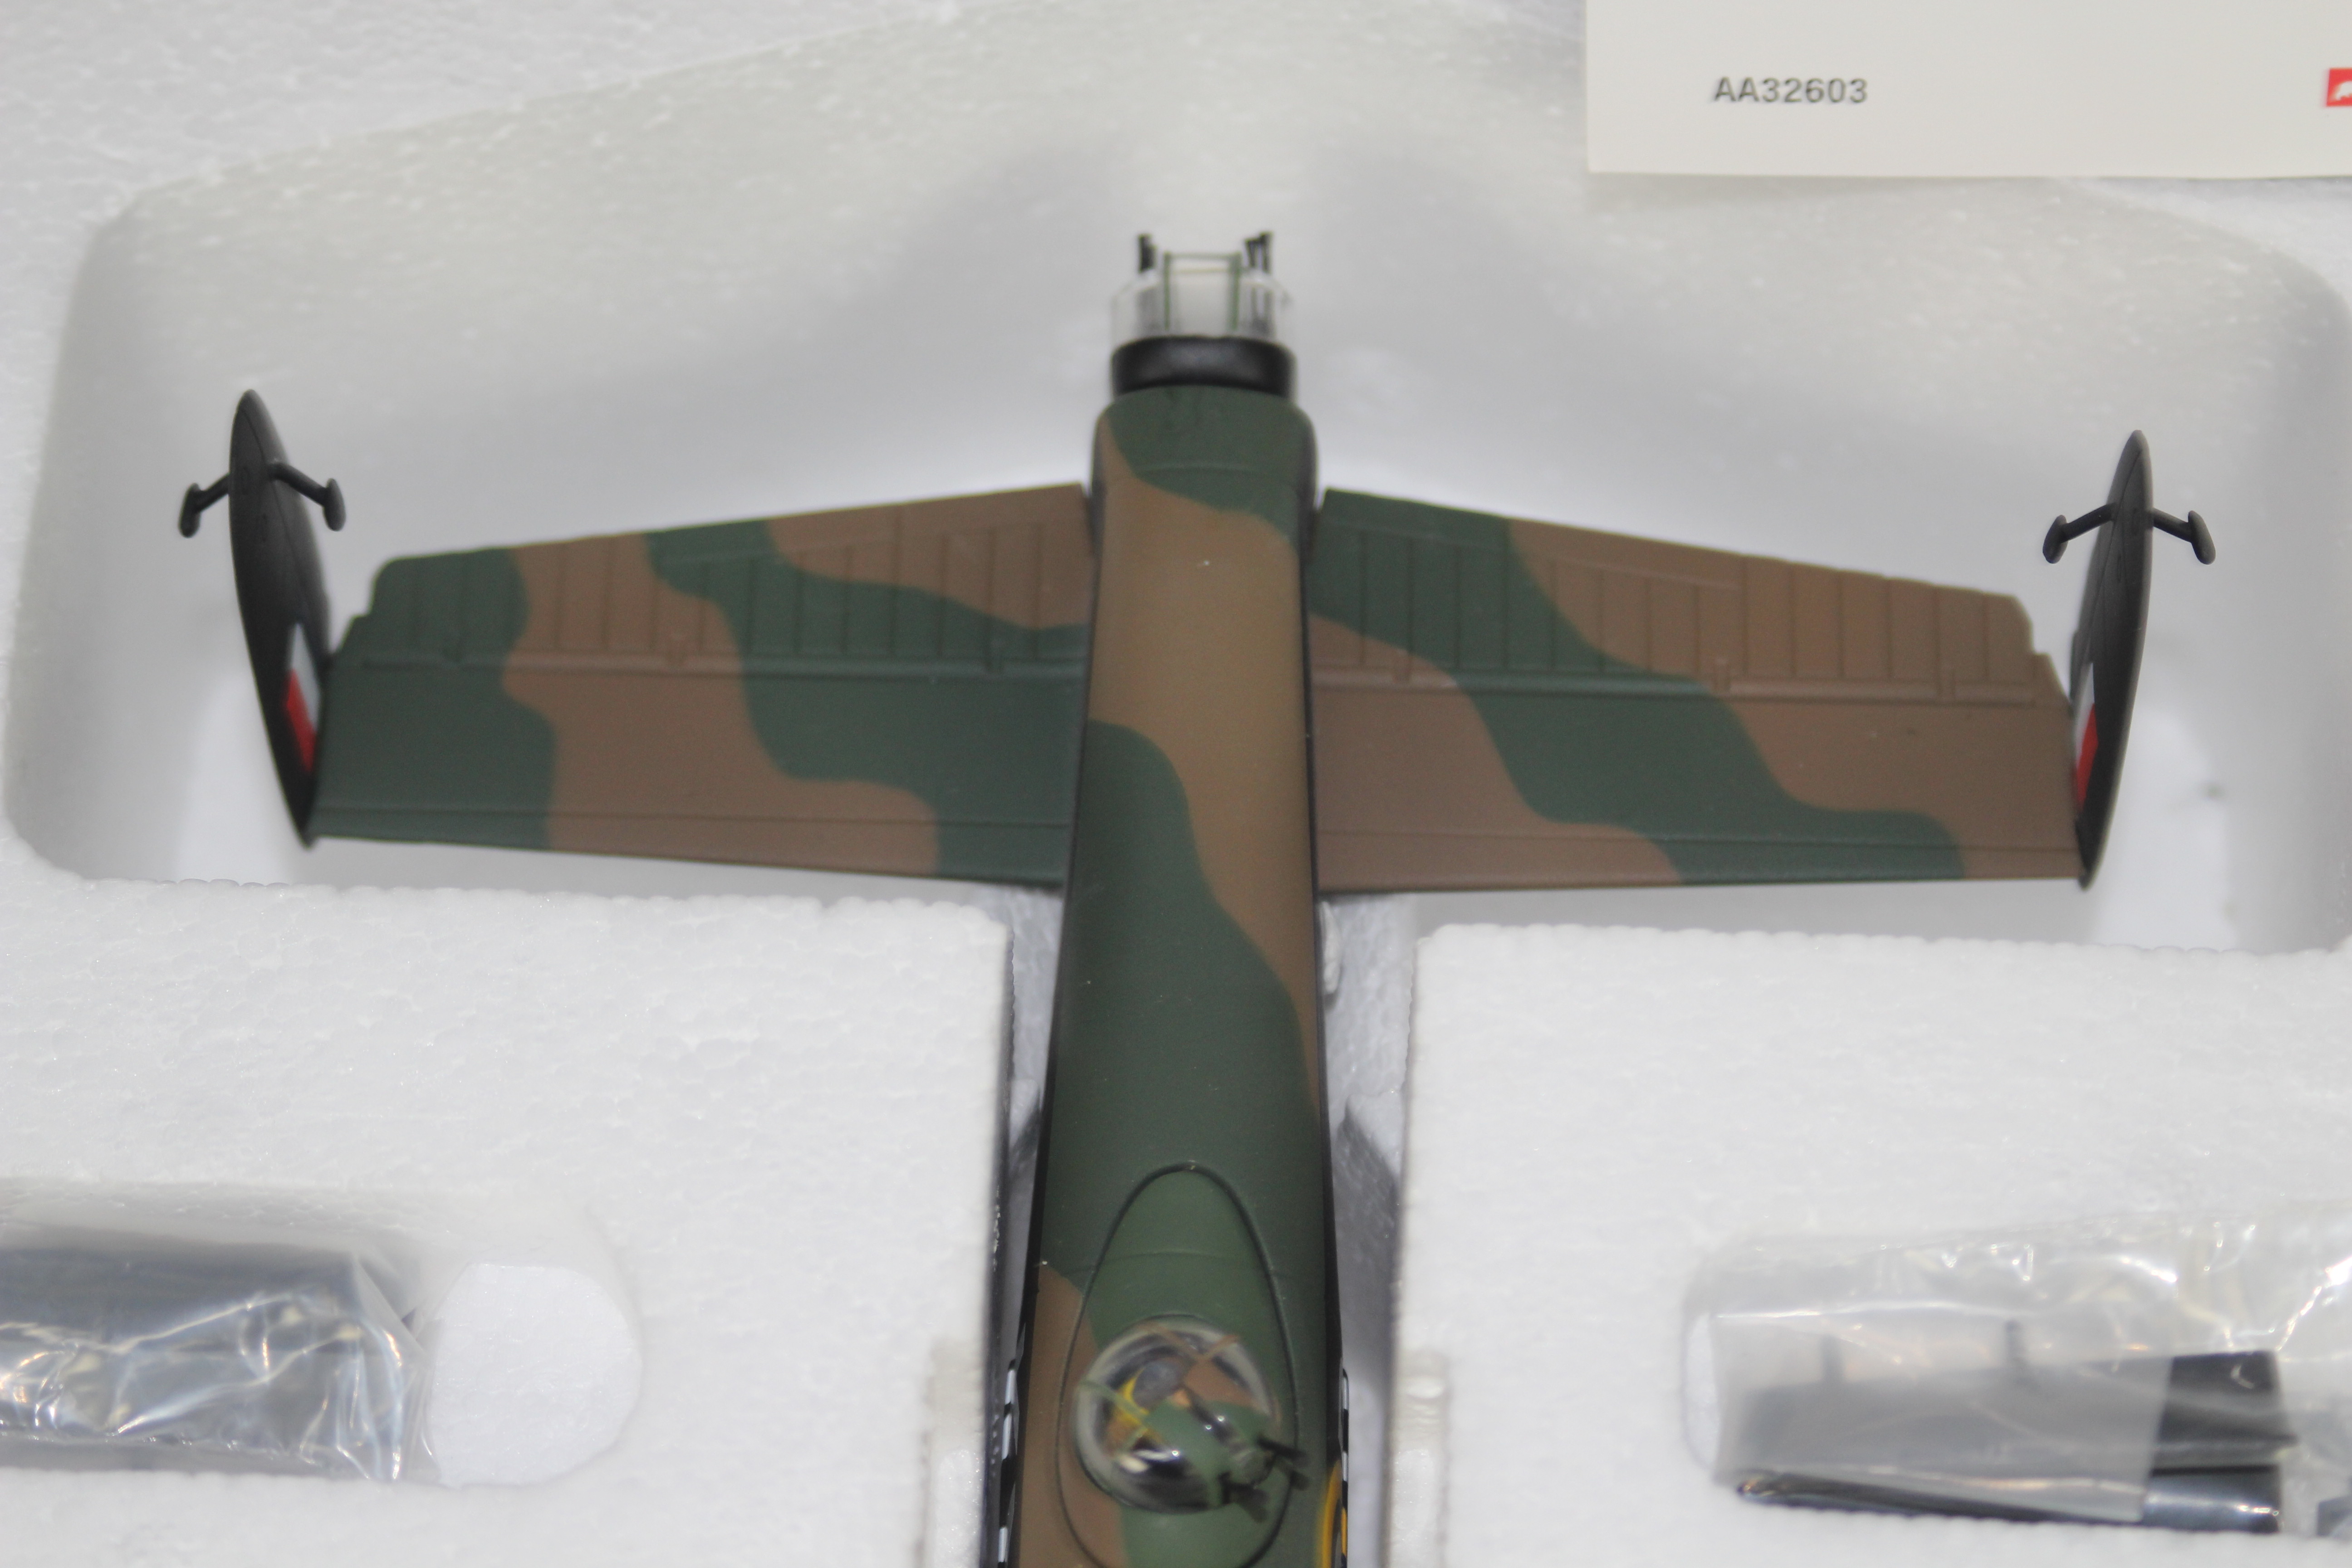 Corgi Aviation Archive - A boxed limited edition 1:72 scale AA32603 AVRO Lancaster R5508/KM-8 No. - Image 4 of 4